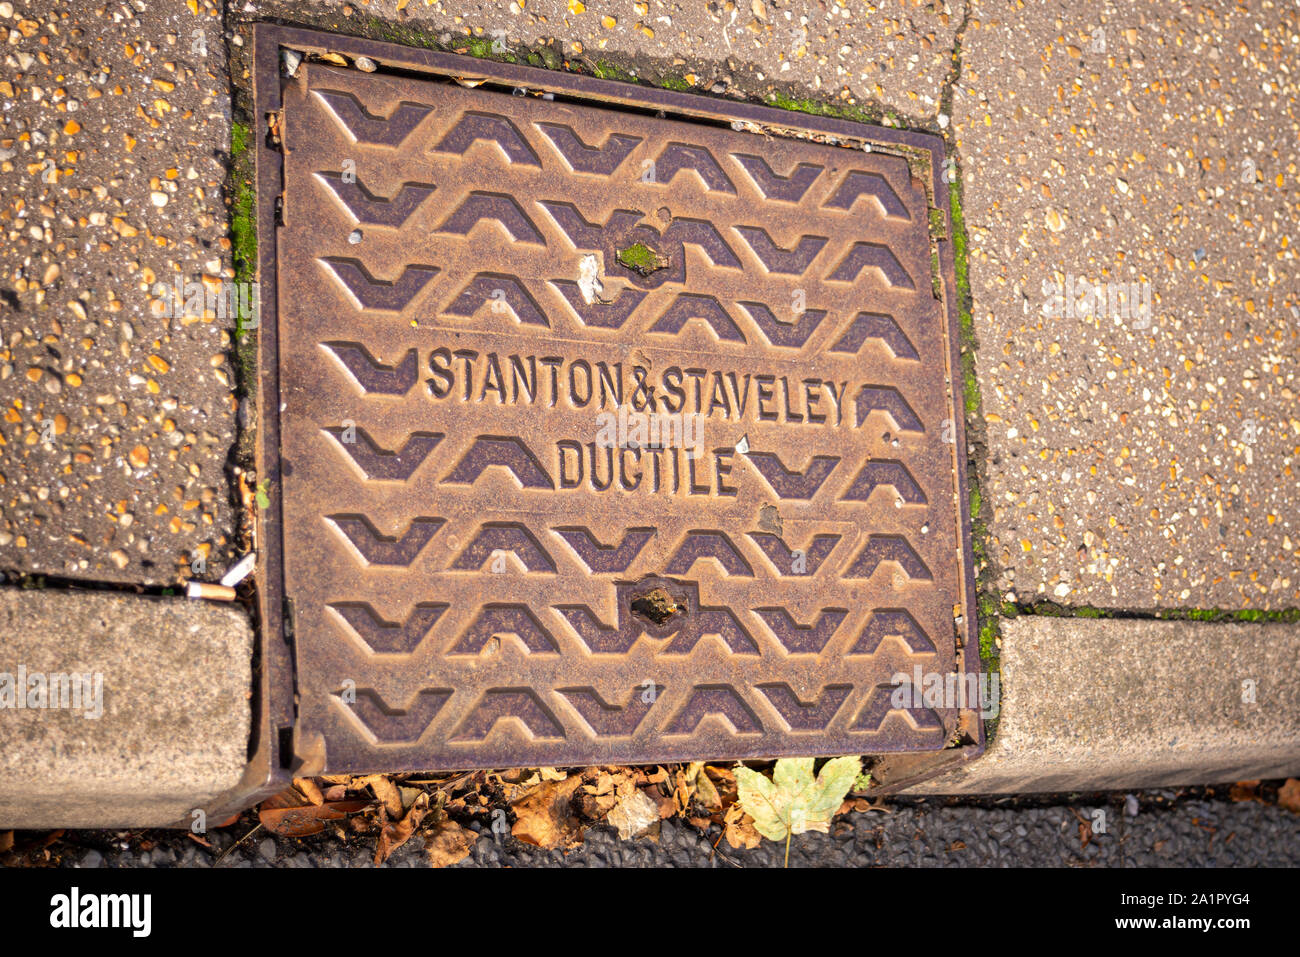 Manhole access cover in Southend on Sea, Essex, UK. Stanton & Staveley Ductile. Curb drain cover with autumn leaves. Space for copy Stock Photo